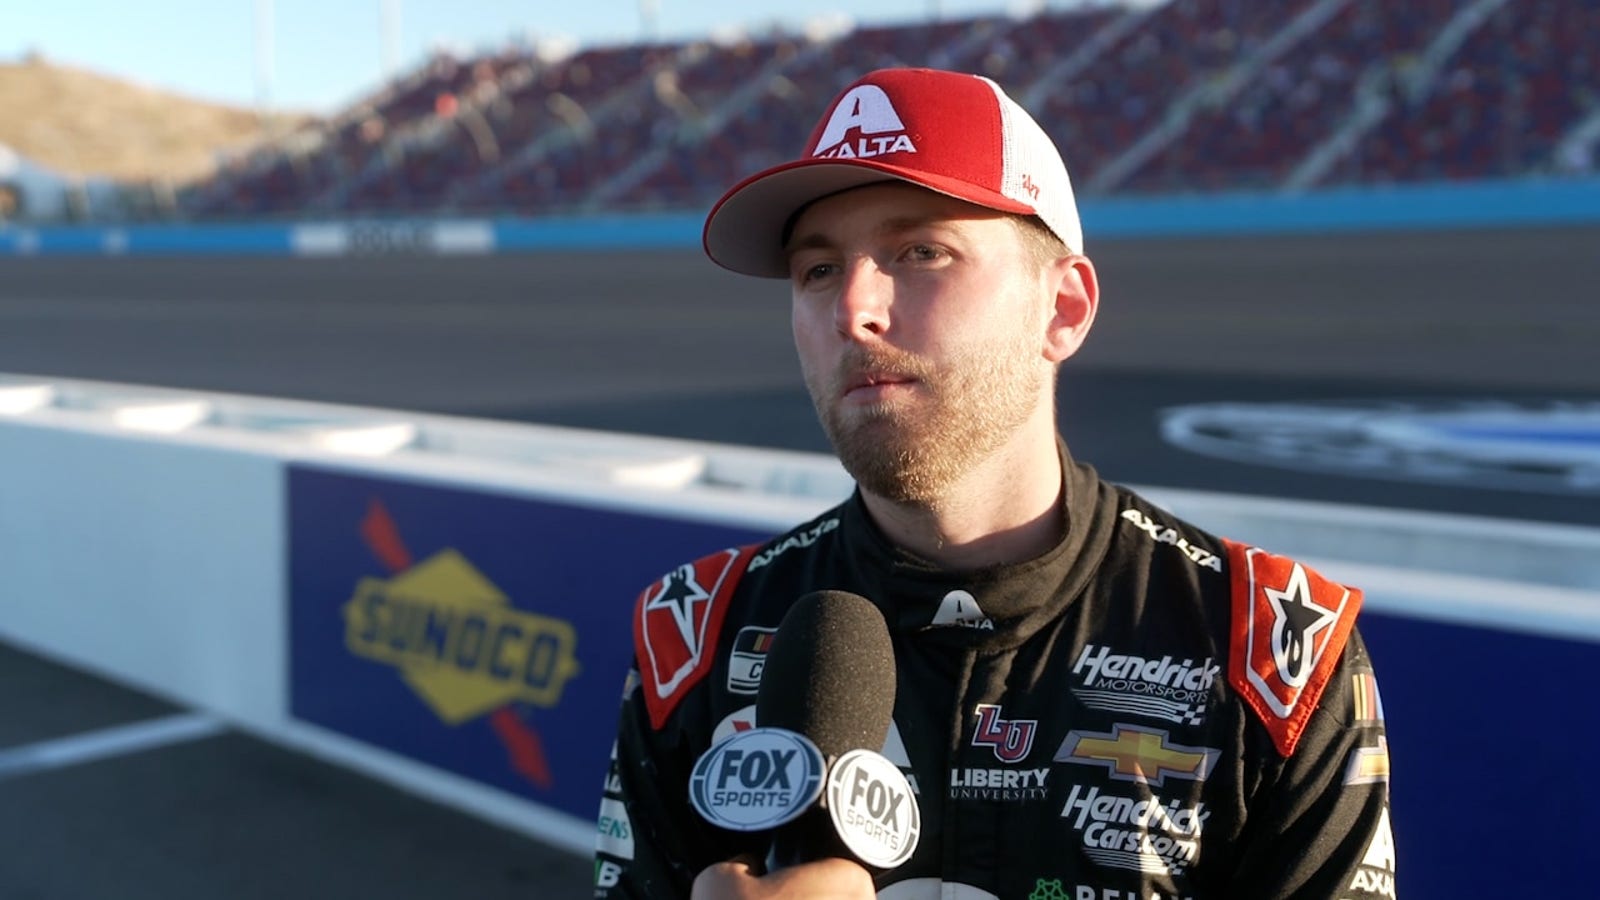 William Byron: "It stings for sure to not win the championship"